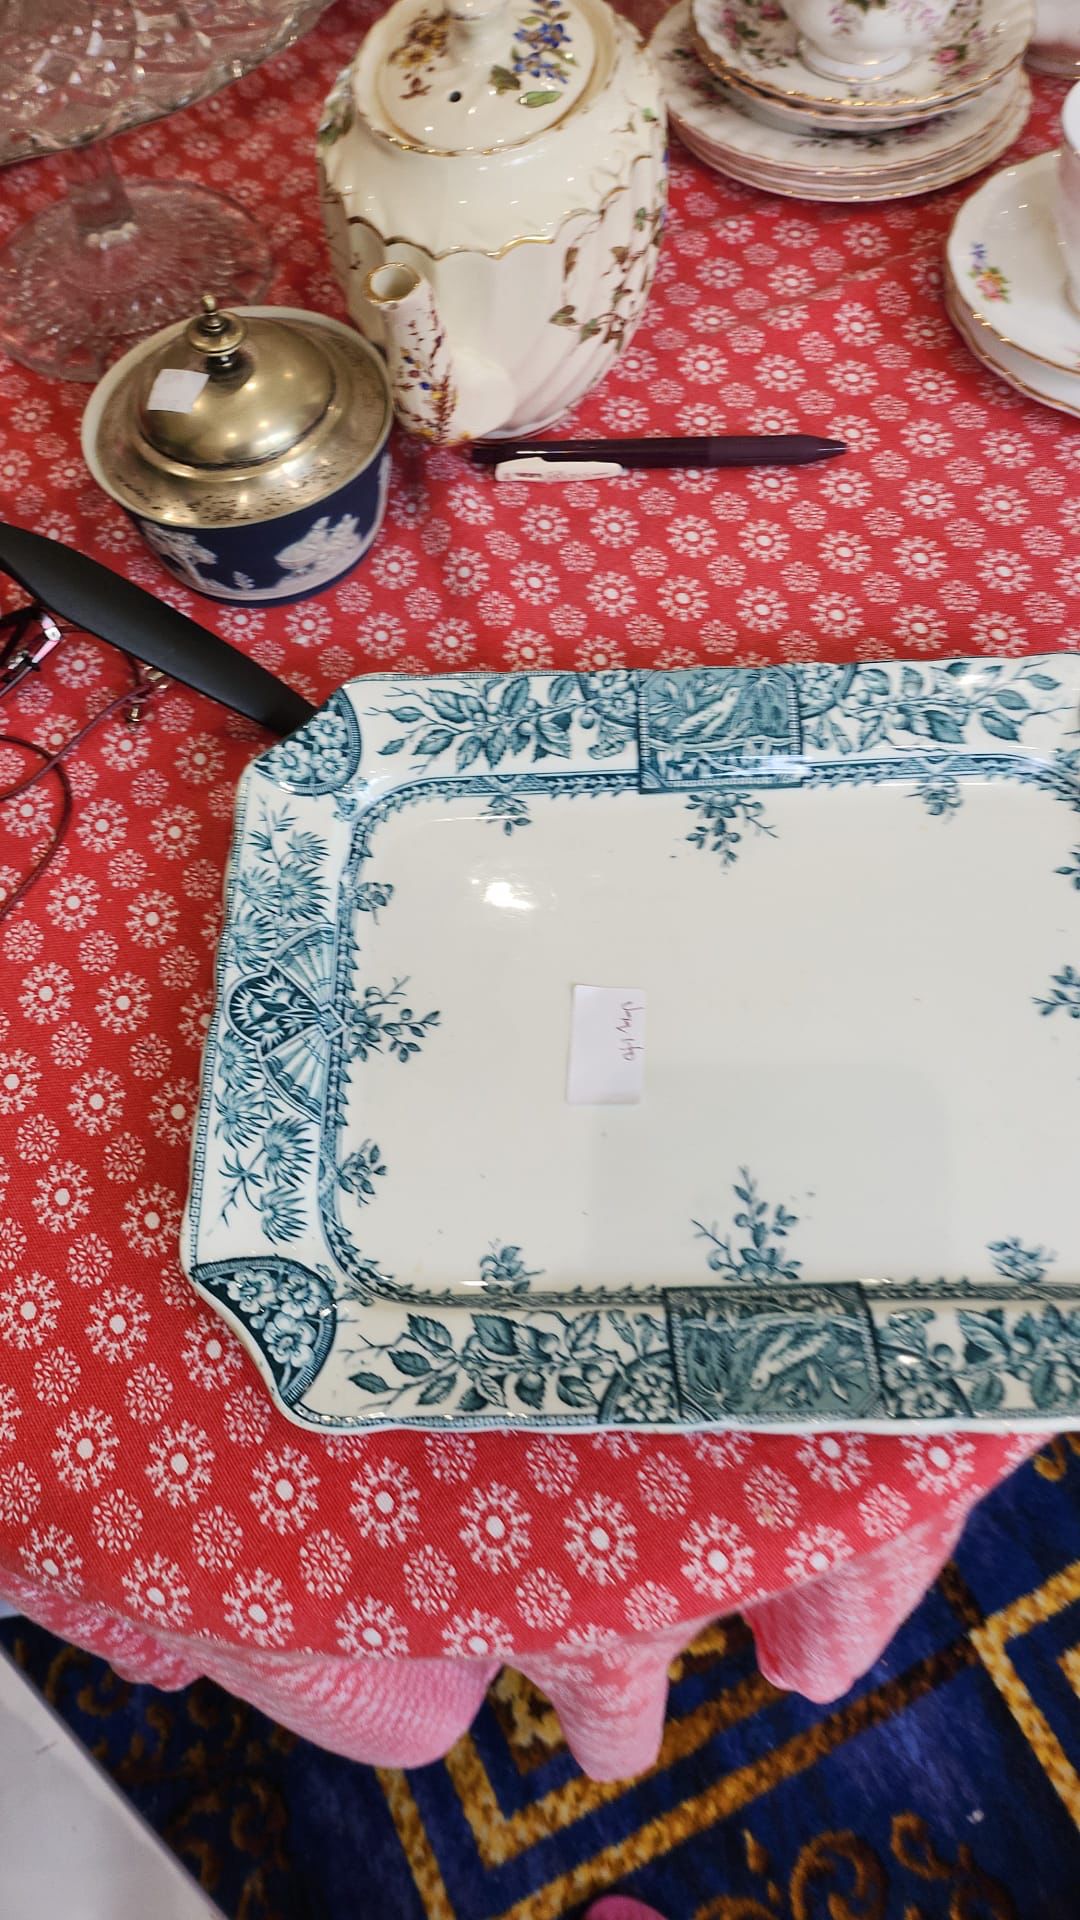 Big Antique Green and white rectangle platter